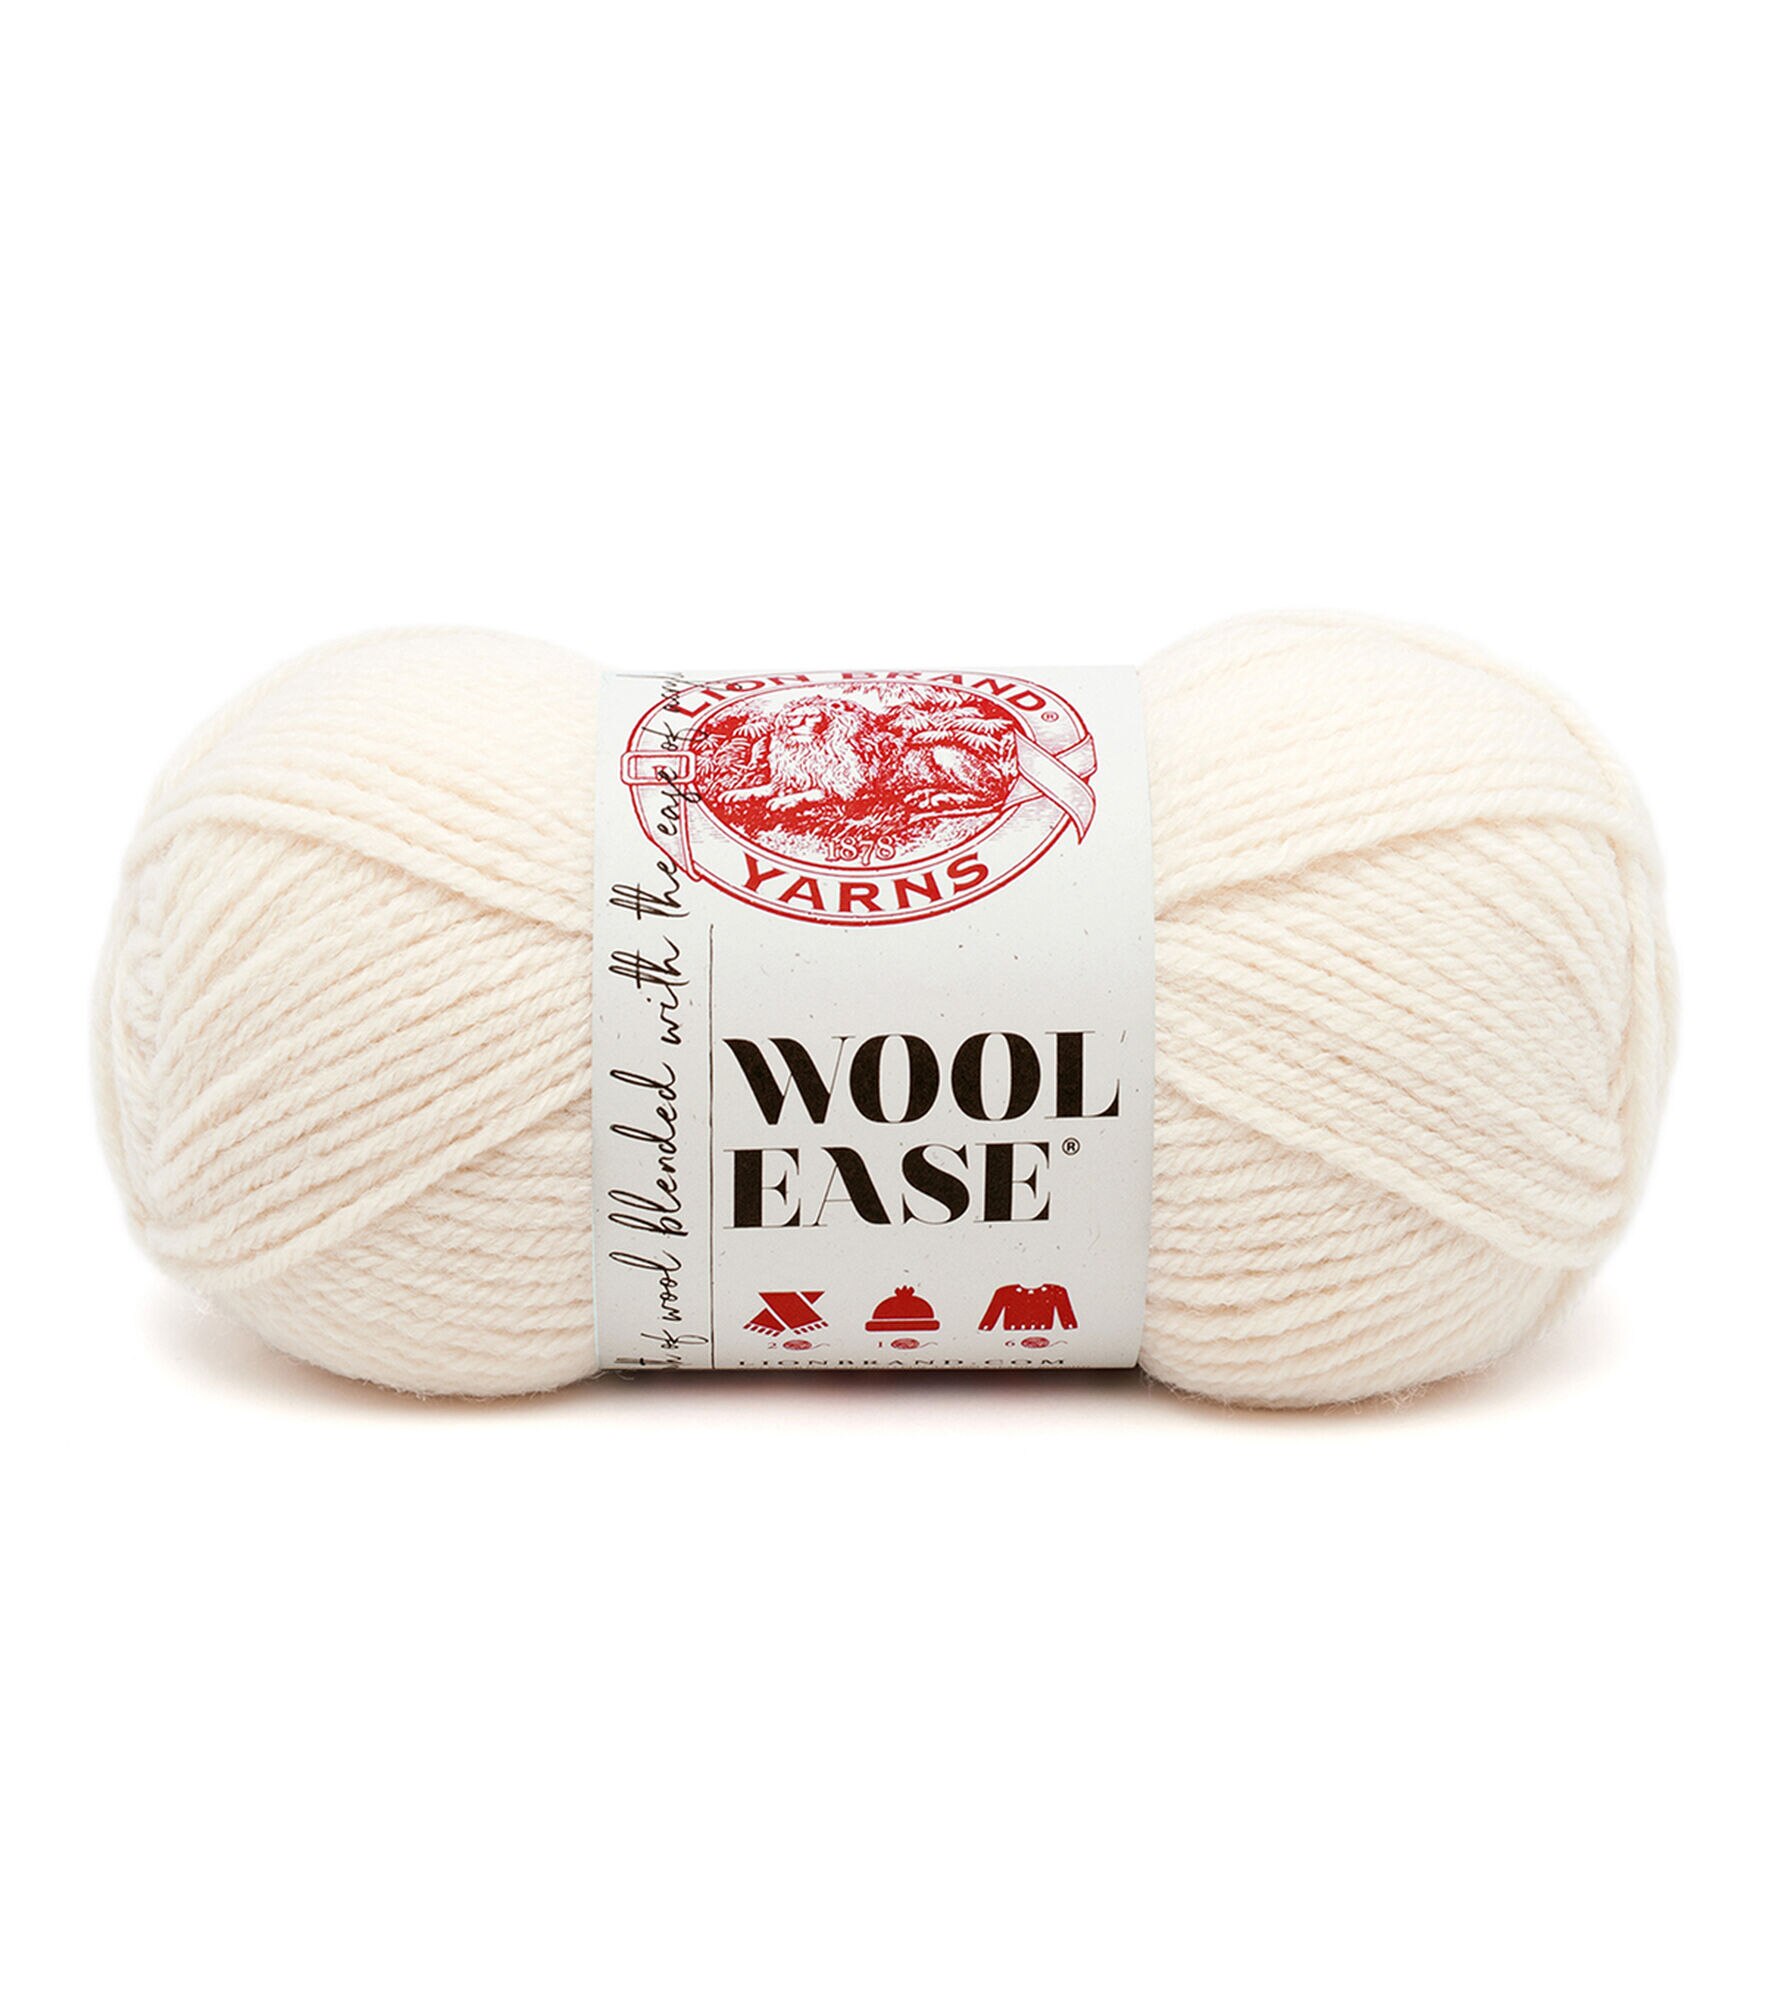  Lion Brand Wool Ease Linen 620-096 (3-Skeins - Same Dye Lot)  Worsted Medium #4 Acrylic, Wool Yarn for Crocheting and Knitting - Bundle  with 1 Artsiga Crafts Project Bag